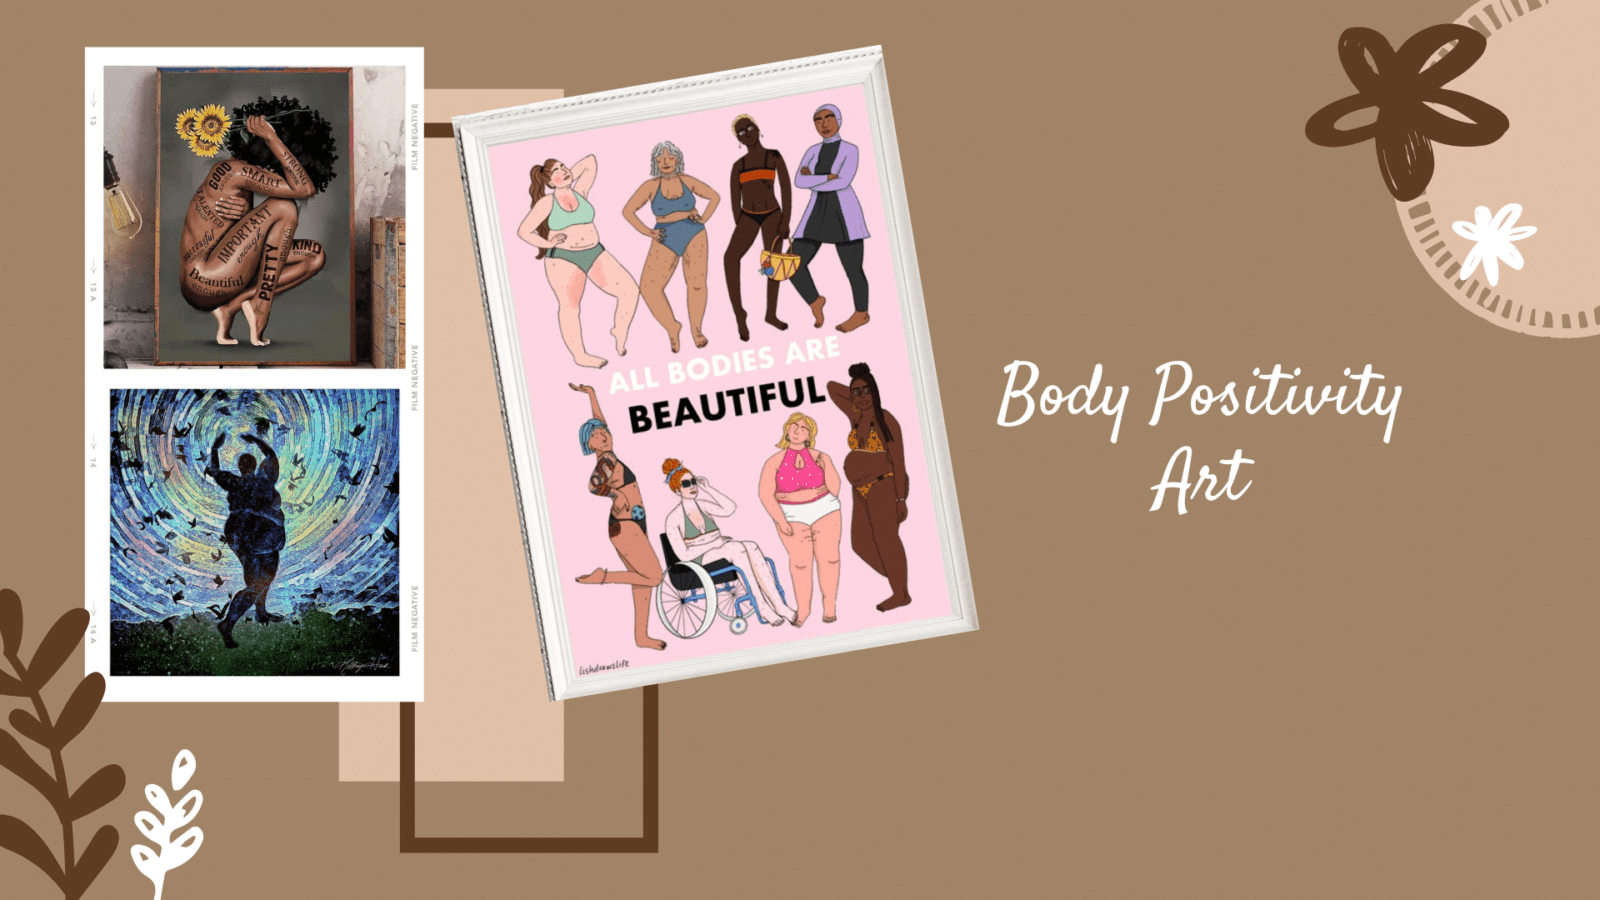 Body positivity art - these artists celebrate bodies of all sizes and people with disabilities.